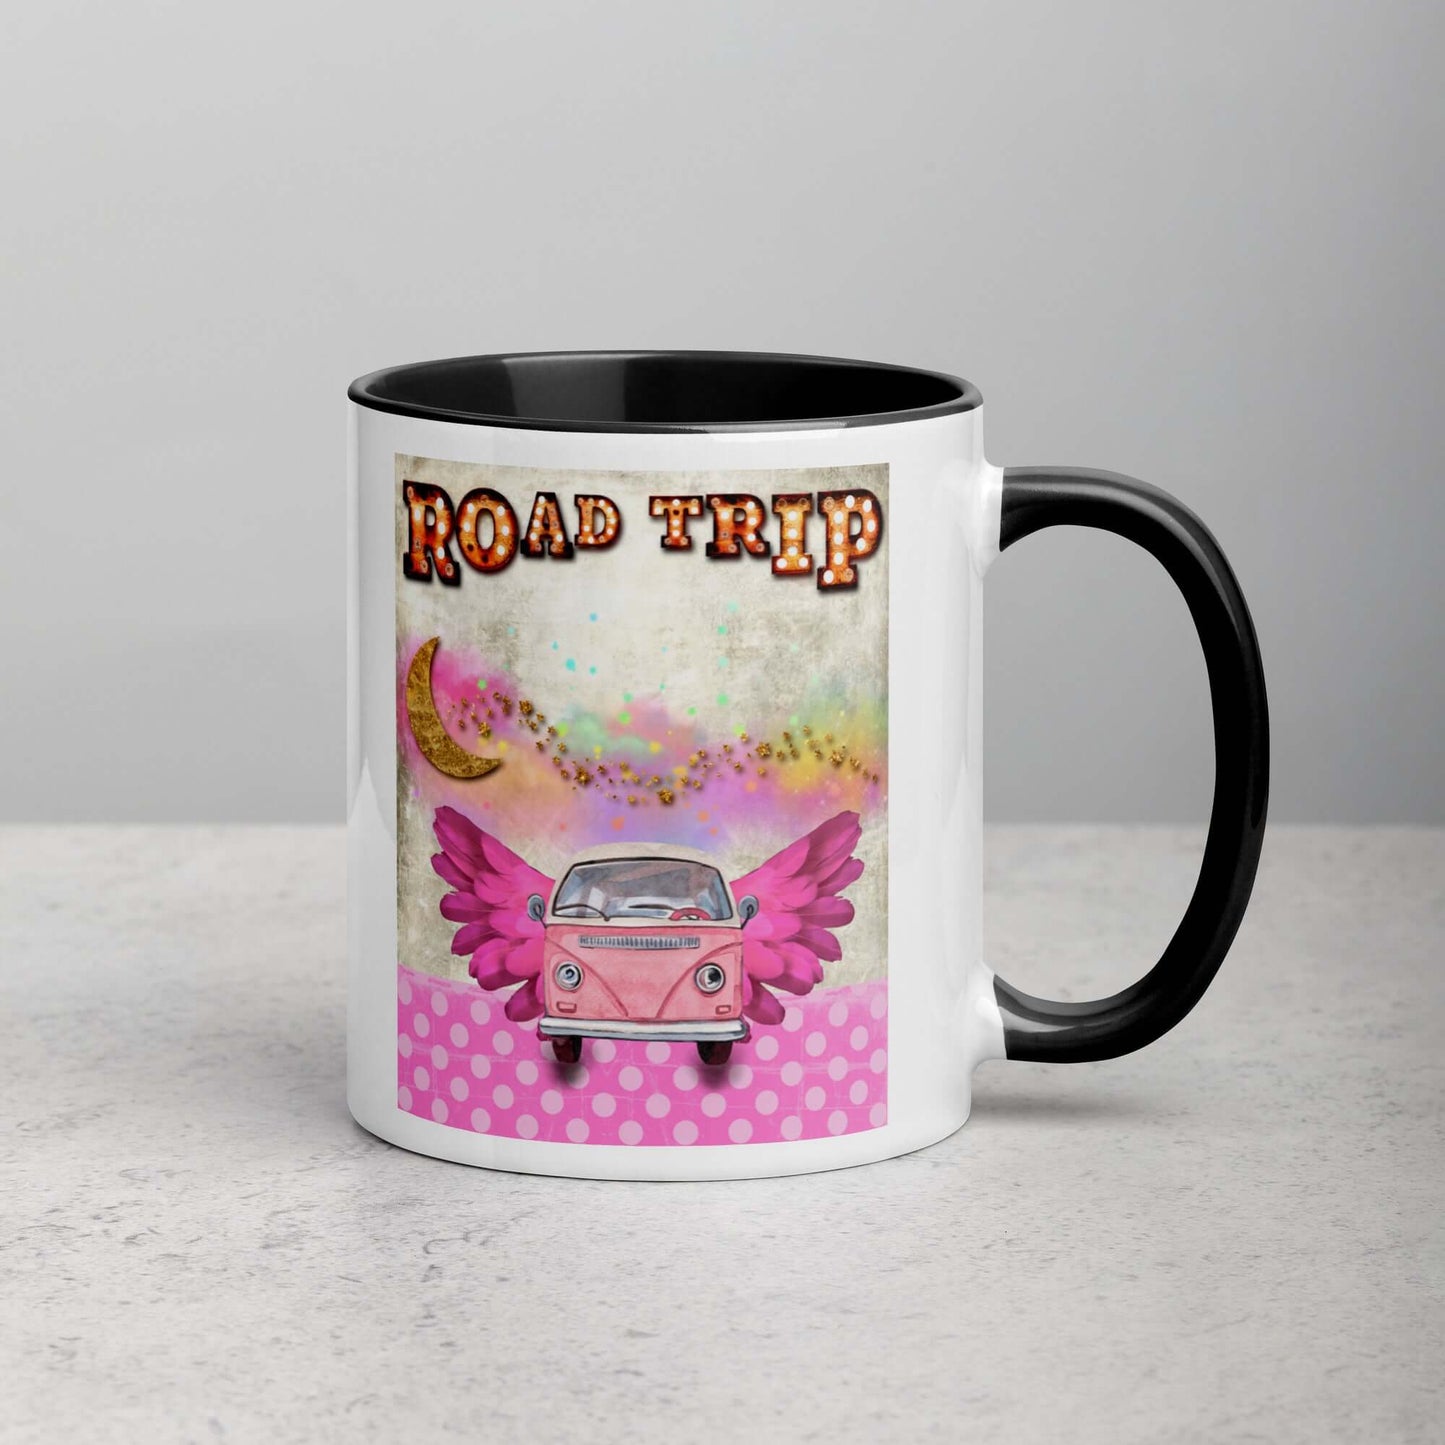 Pink Camper Van in Rainbow Clouds with Moon and Stars “Road Trip” Mug with Black Color Inside Right Handed Front View